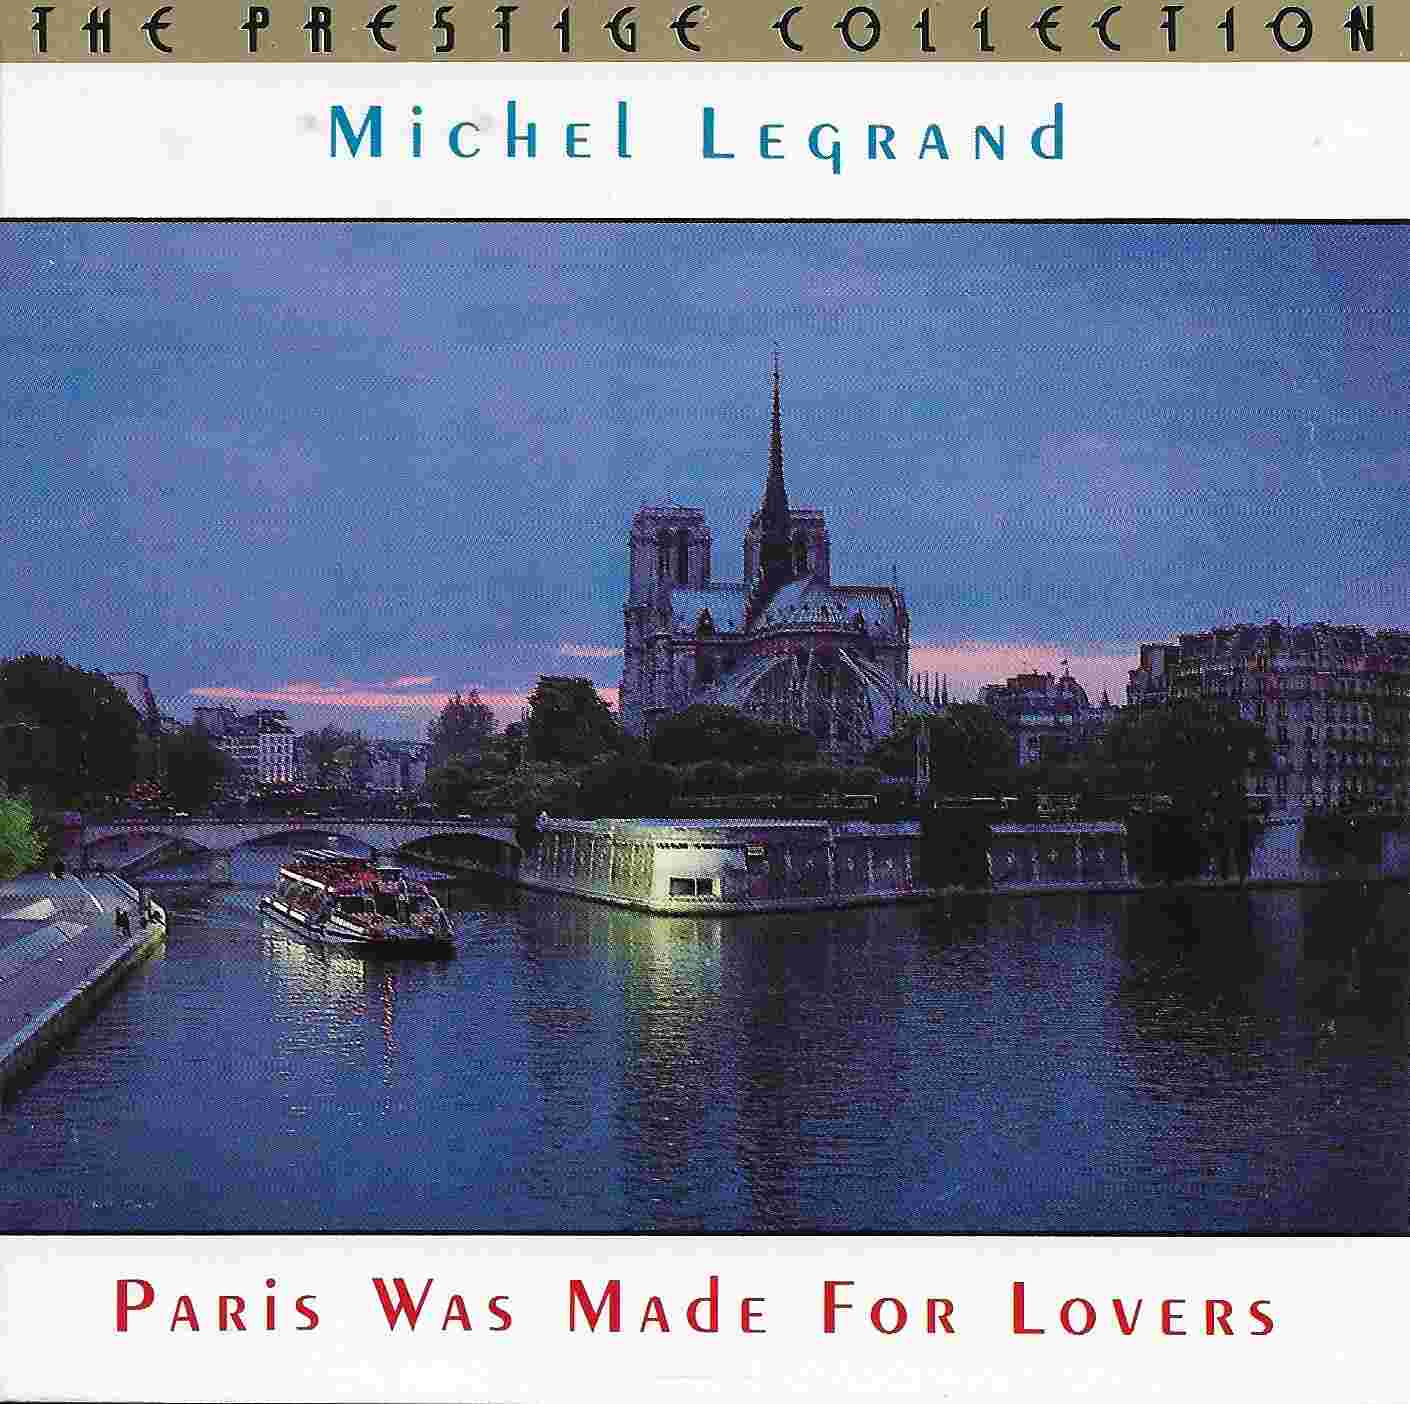 Picture of Paris was made for lovers by artist Michael Legrand from the BBC cds - Records and Tapes library